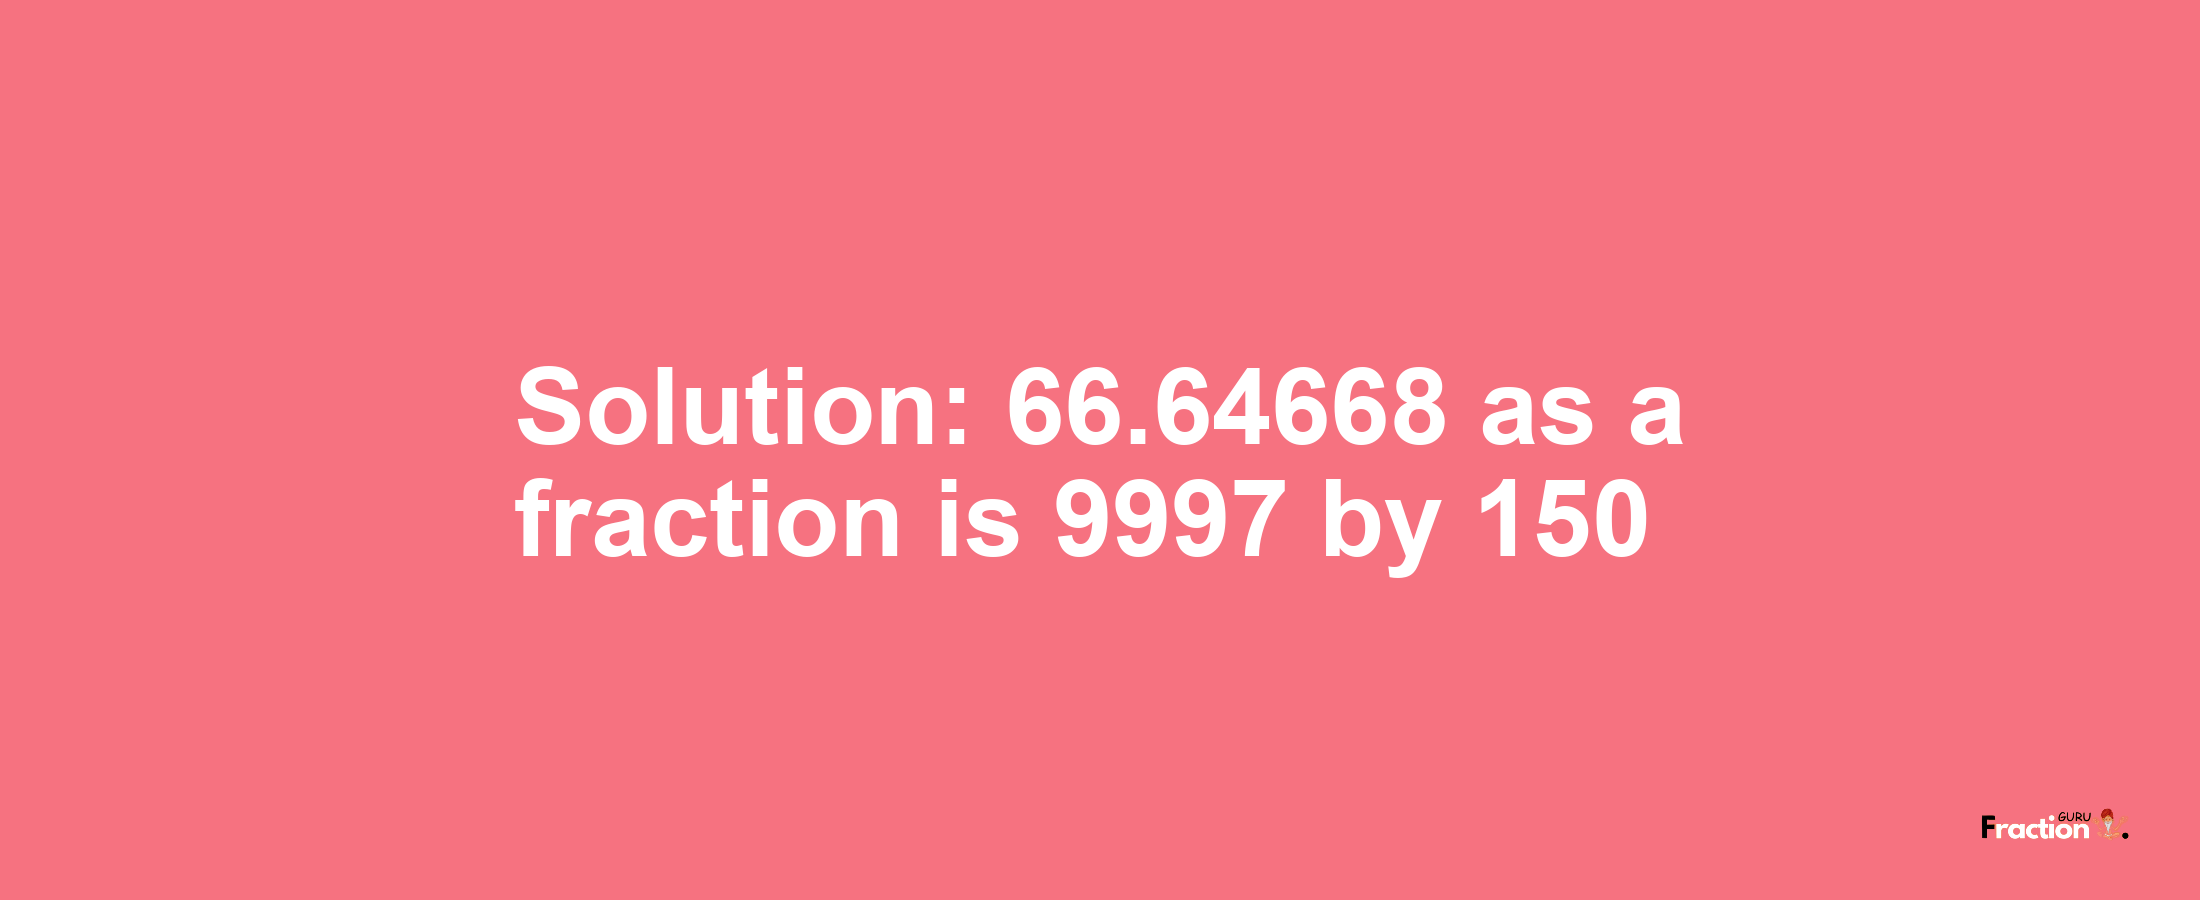 Solution:66.64668 as a fraction is 9997/150